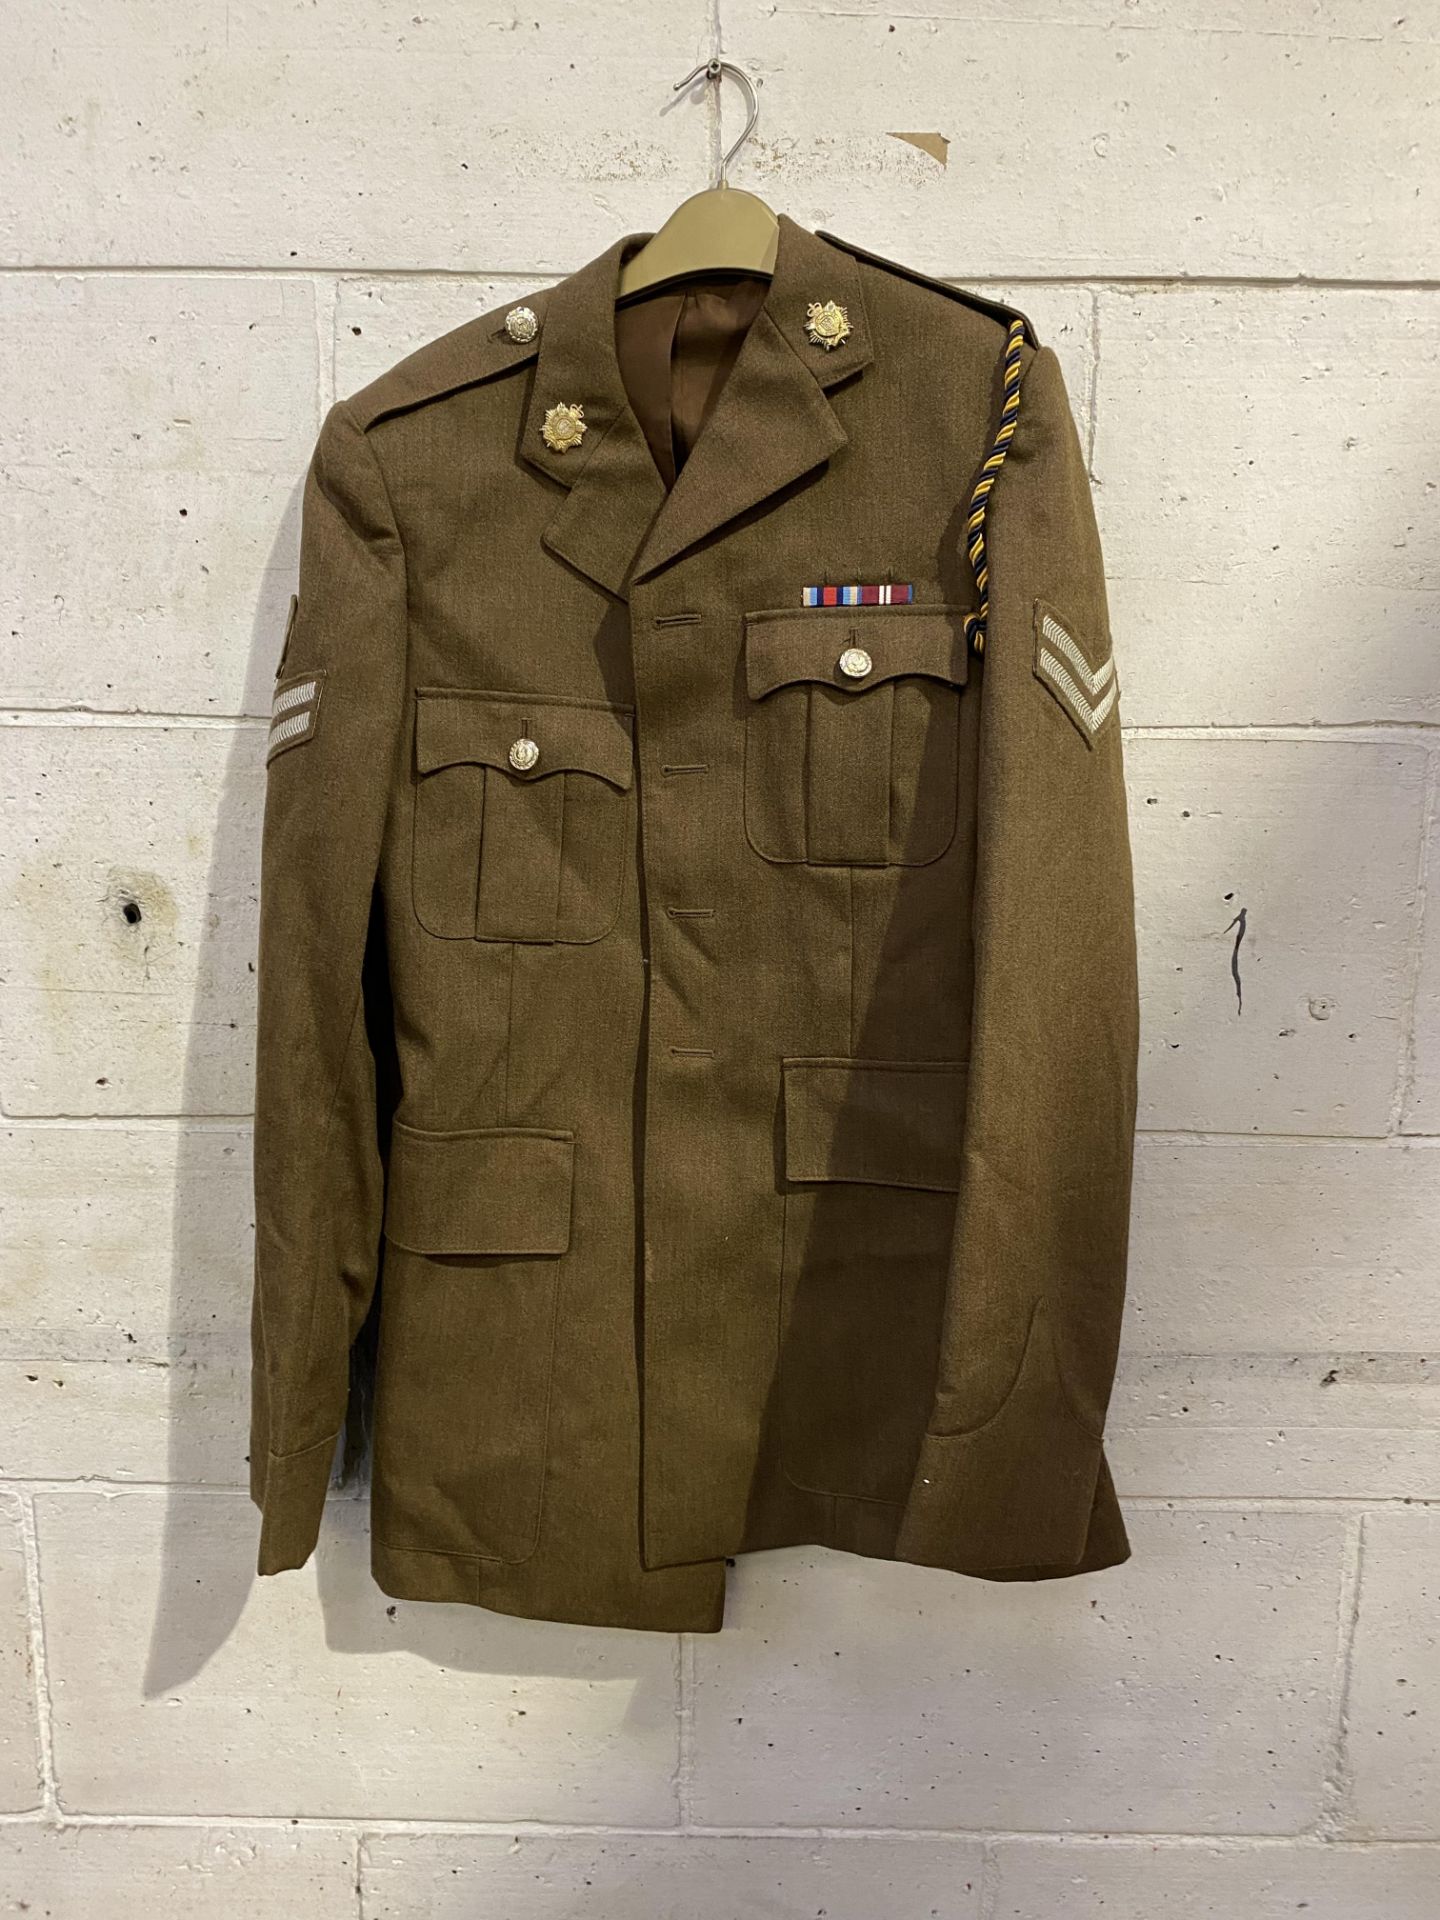 Army dress jacket together with a sailor's dress jacket and cap